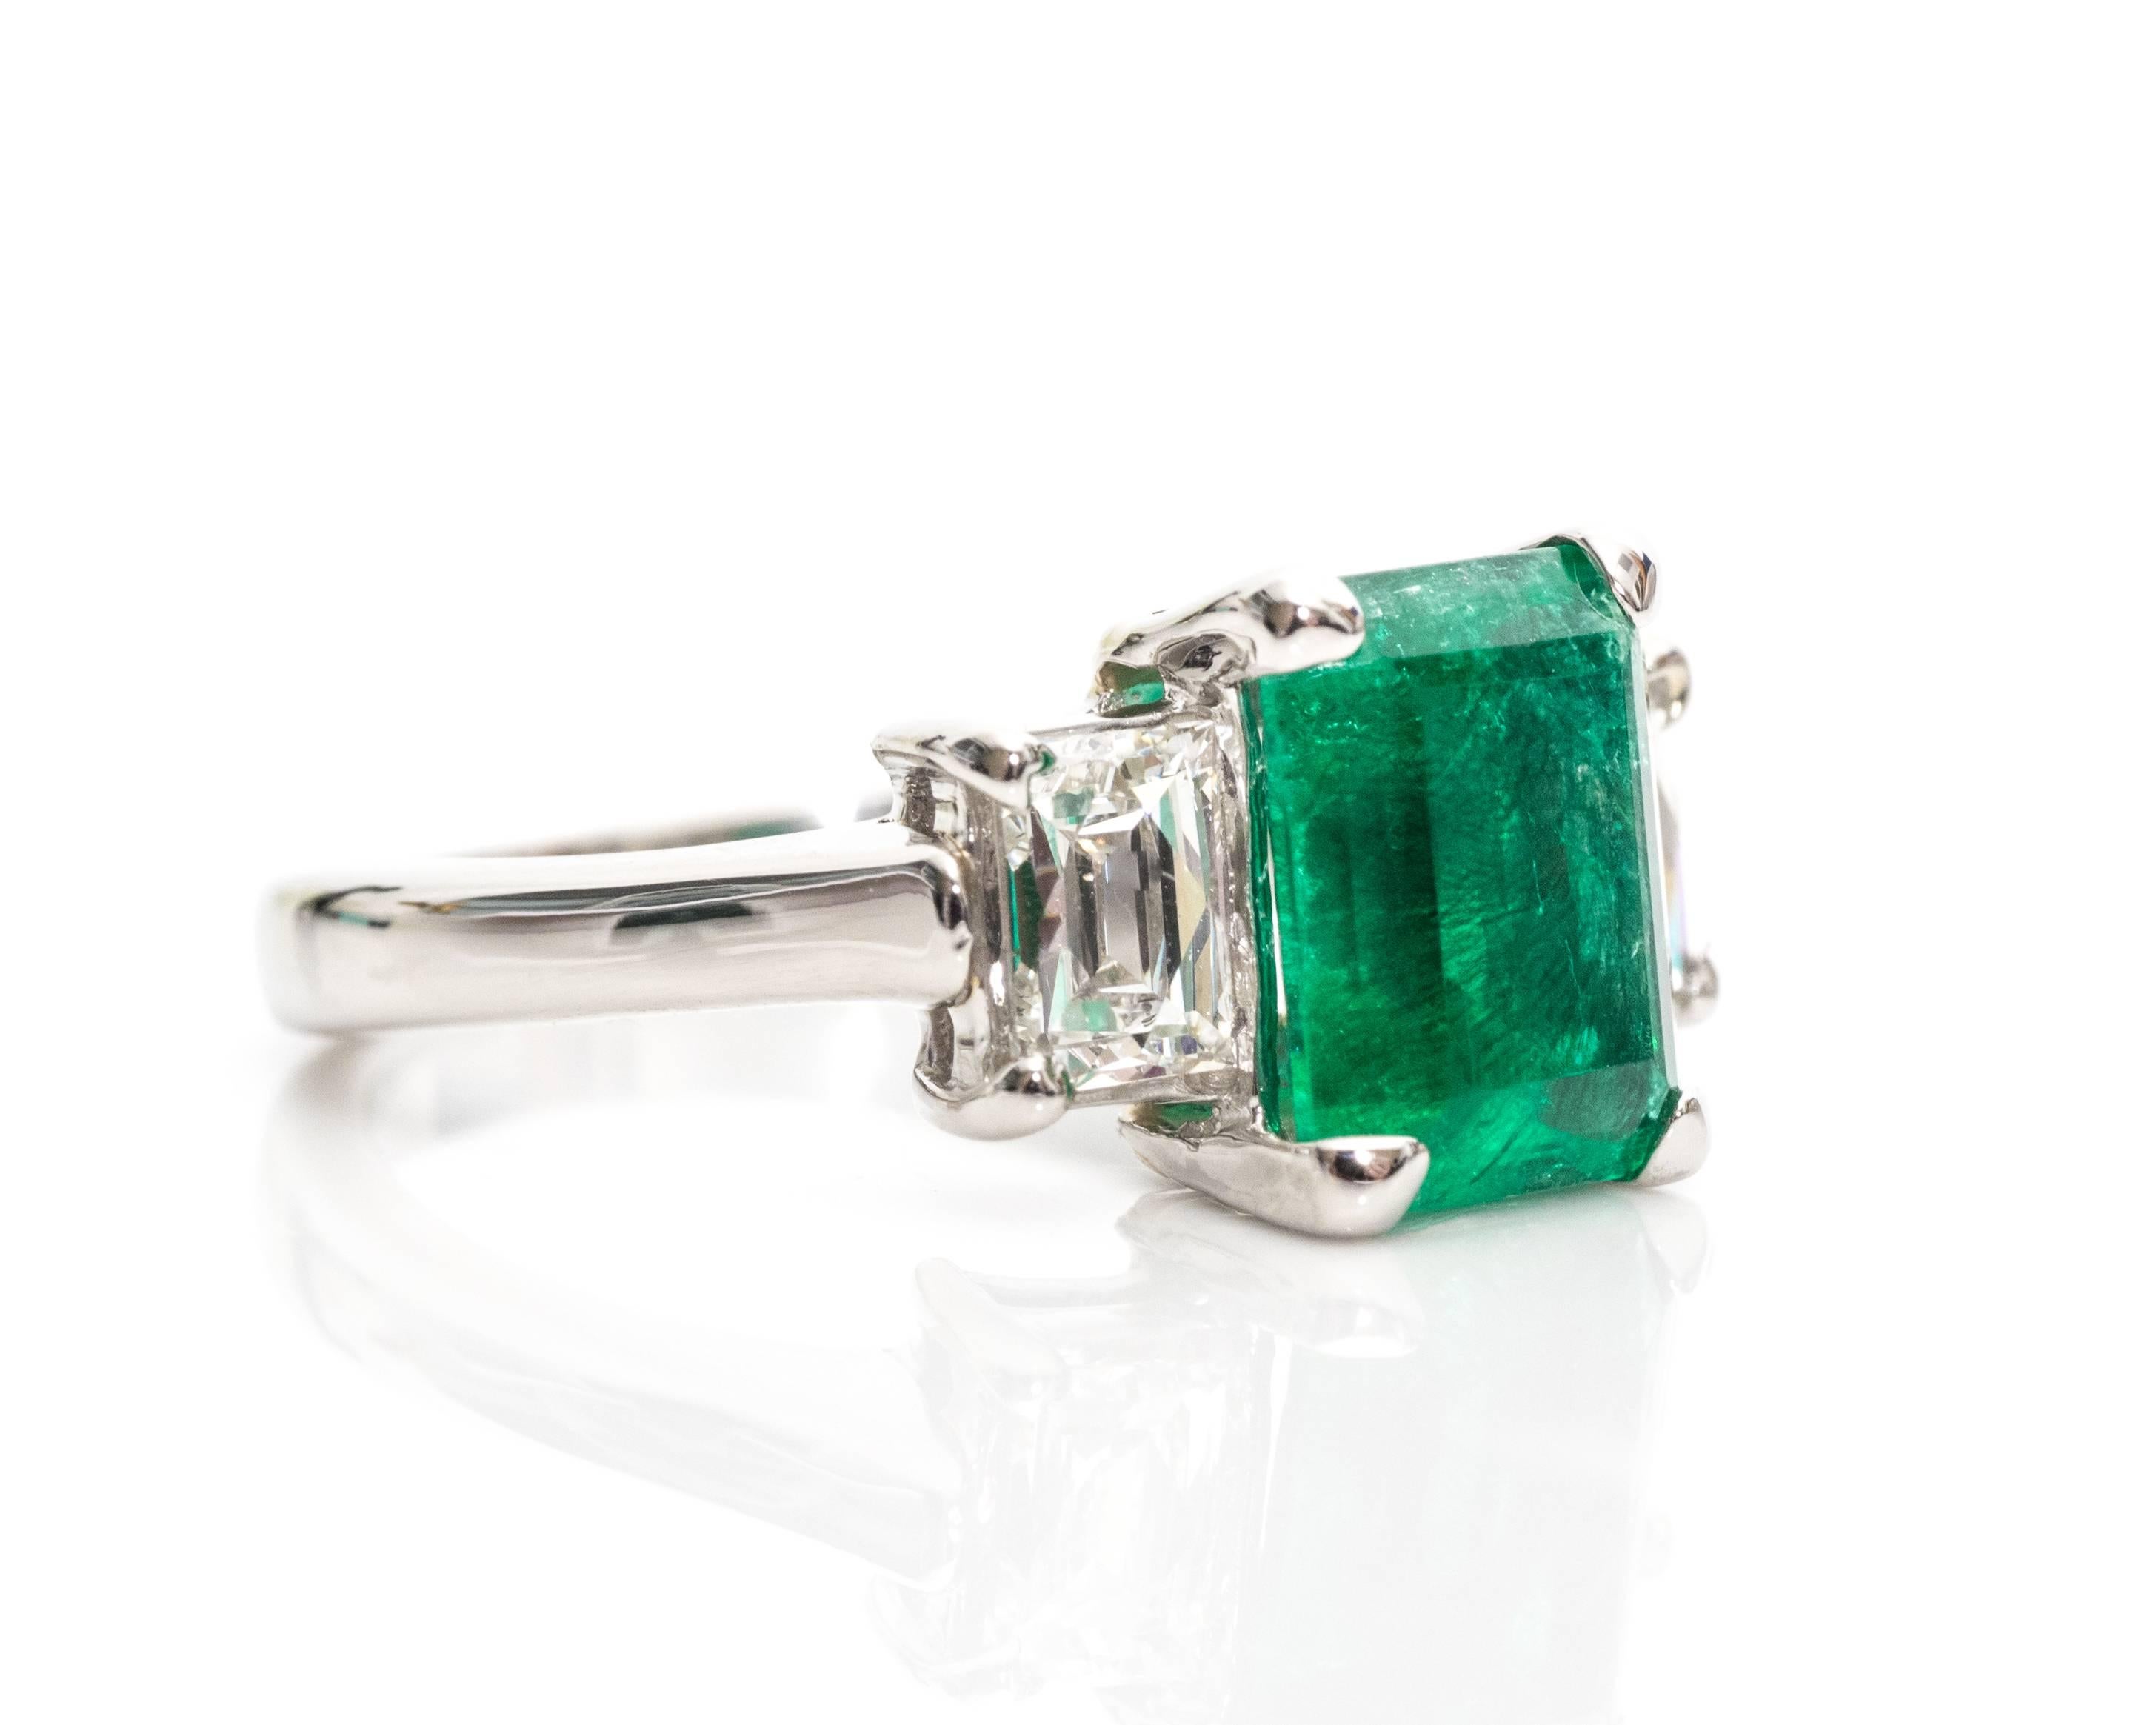 A stunning 1992 engagement ring from the brand Tycoon featuring a gorgeous Columbian Emerald and stunning sparkly diamonds, all crafted in platinum! 

The center emerald has a traditional emerald shape gemstone, Columbian origin, in a four-prong